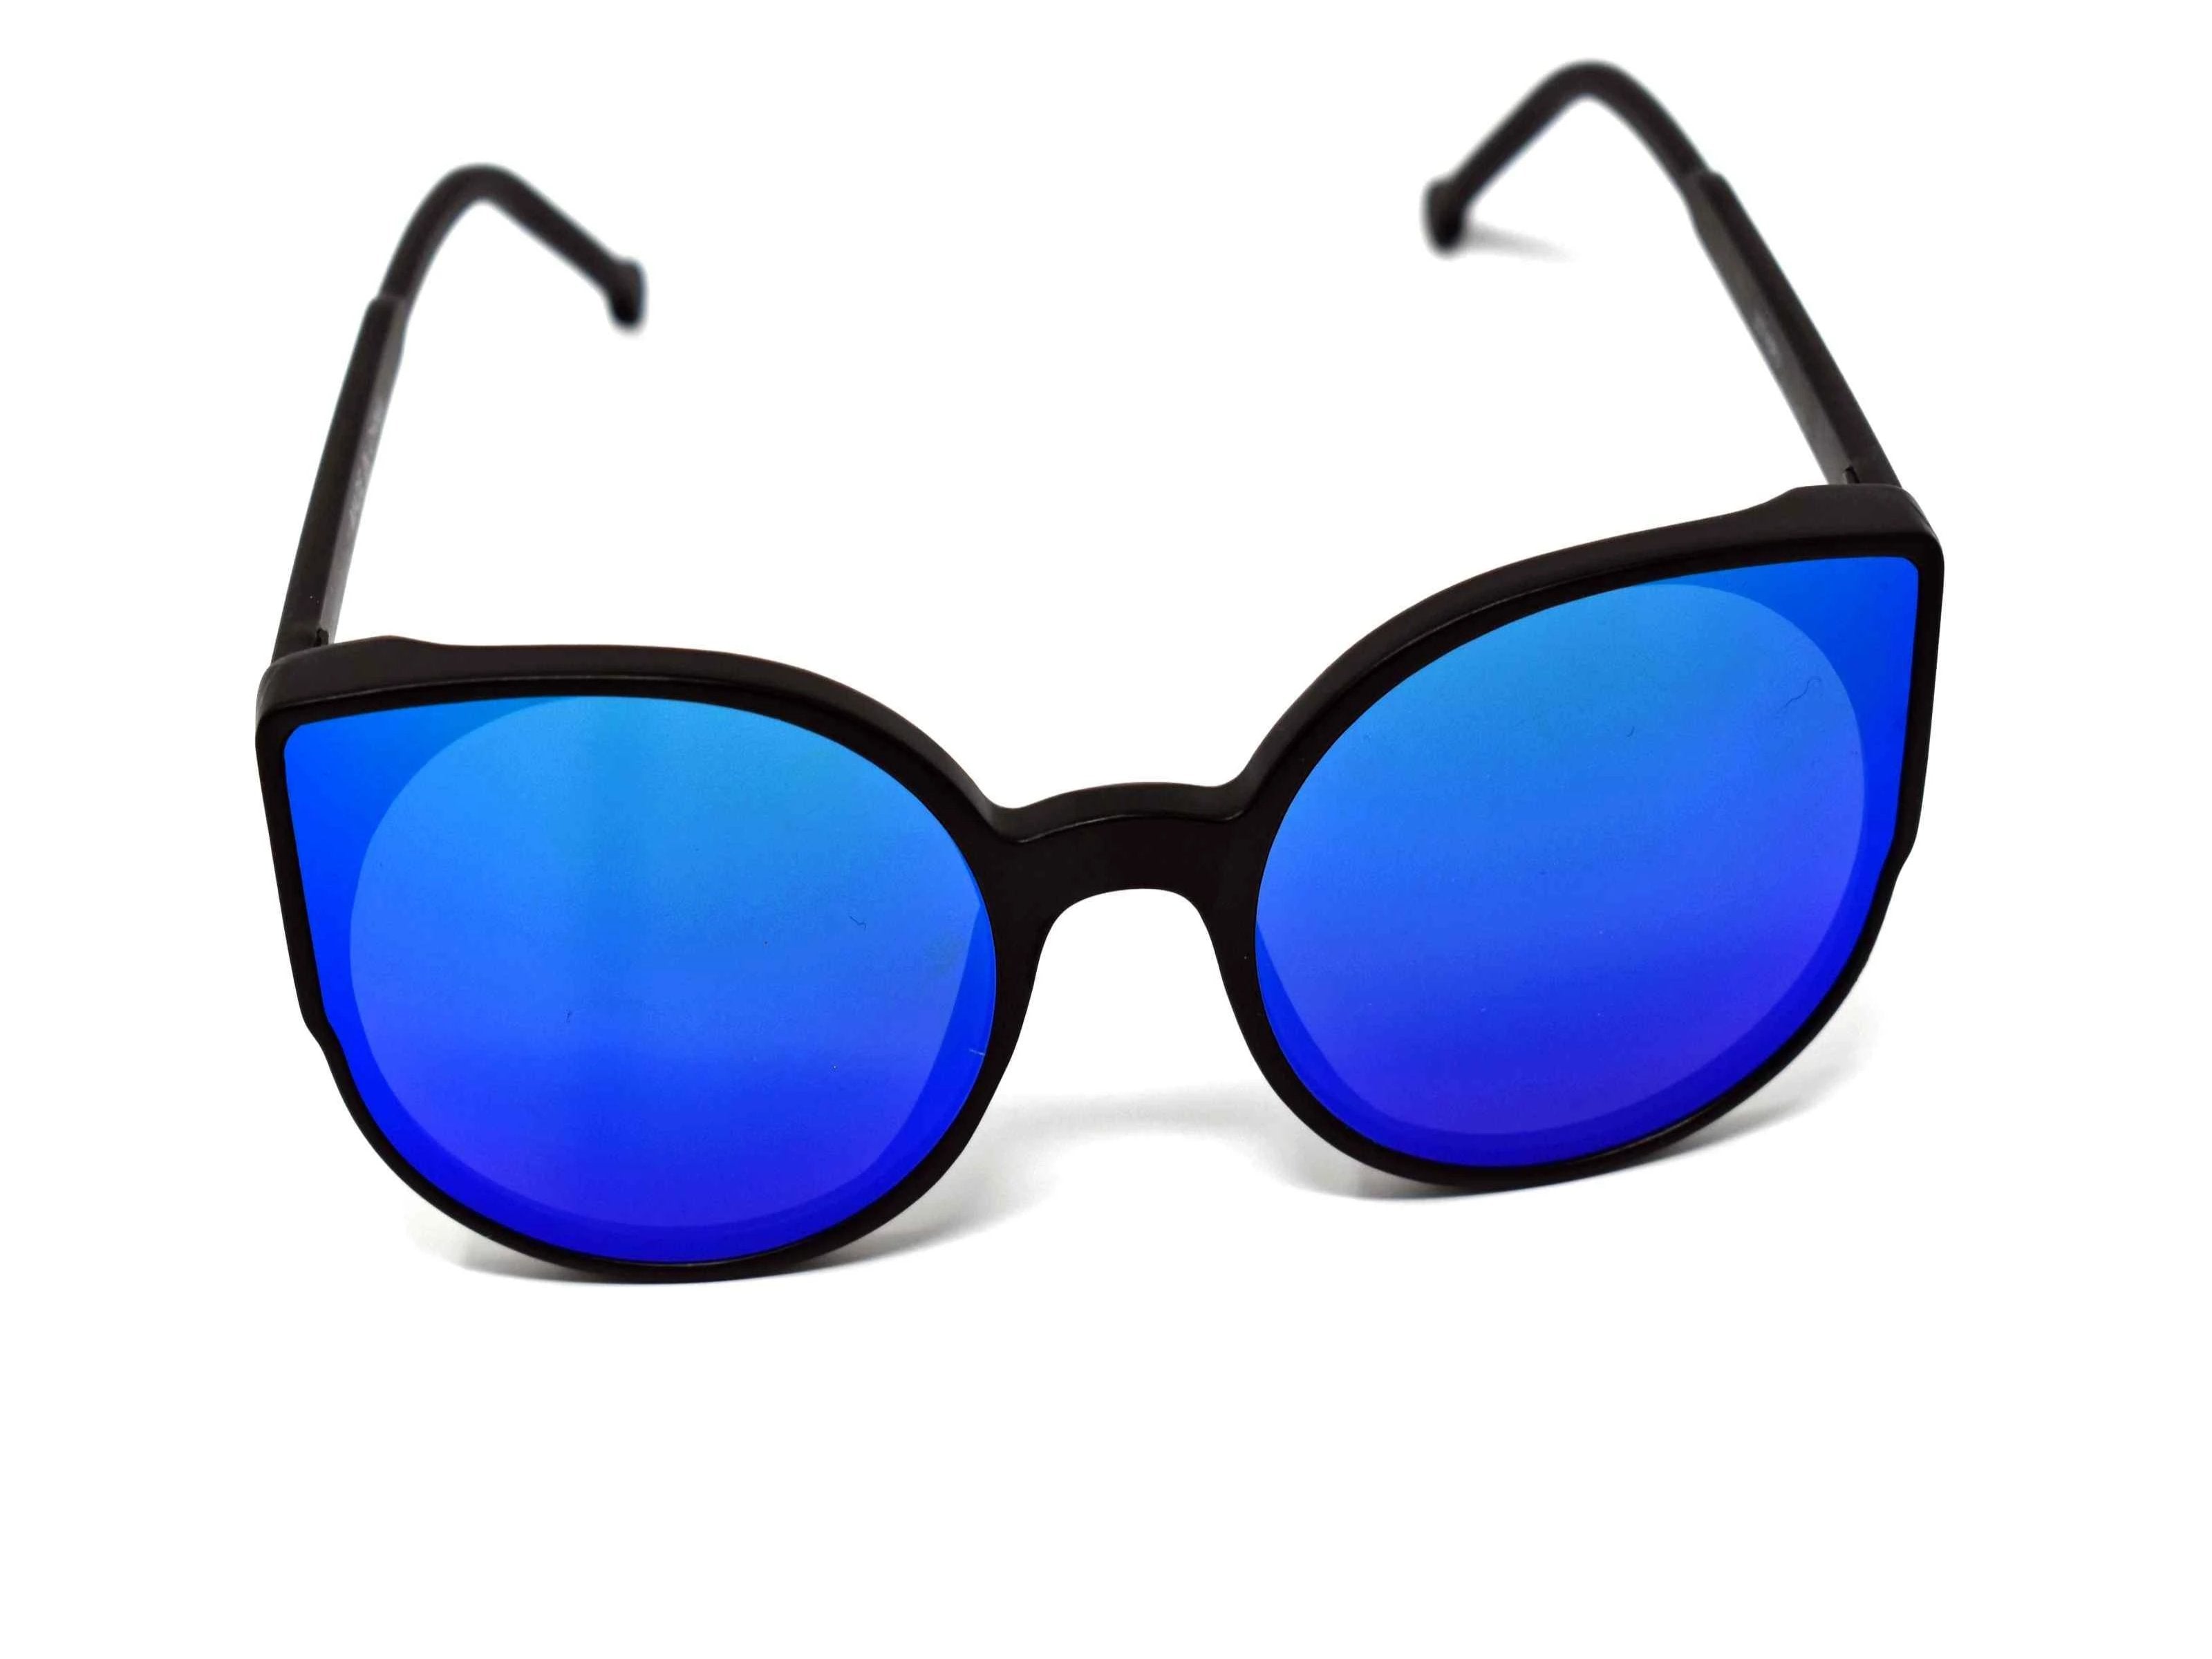 Say hello to our stylish Tansy black framed sunglasses with aqua blue mirrored lens and a cat eye shape. 